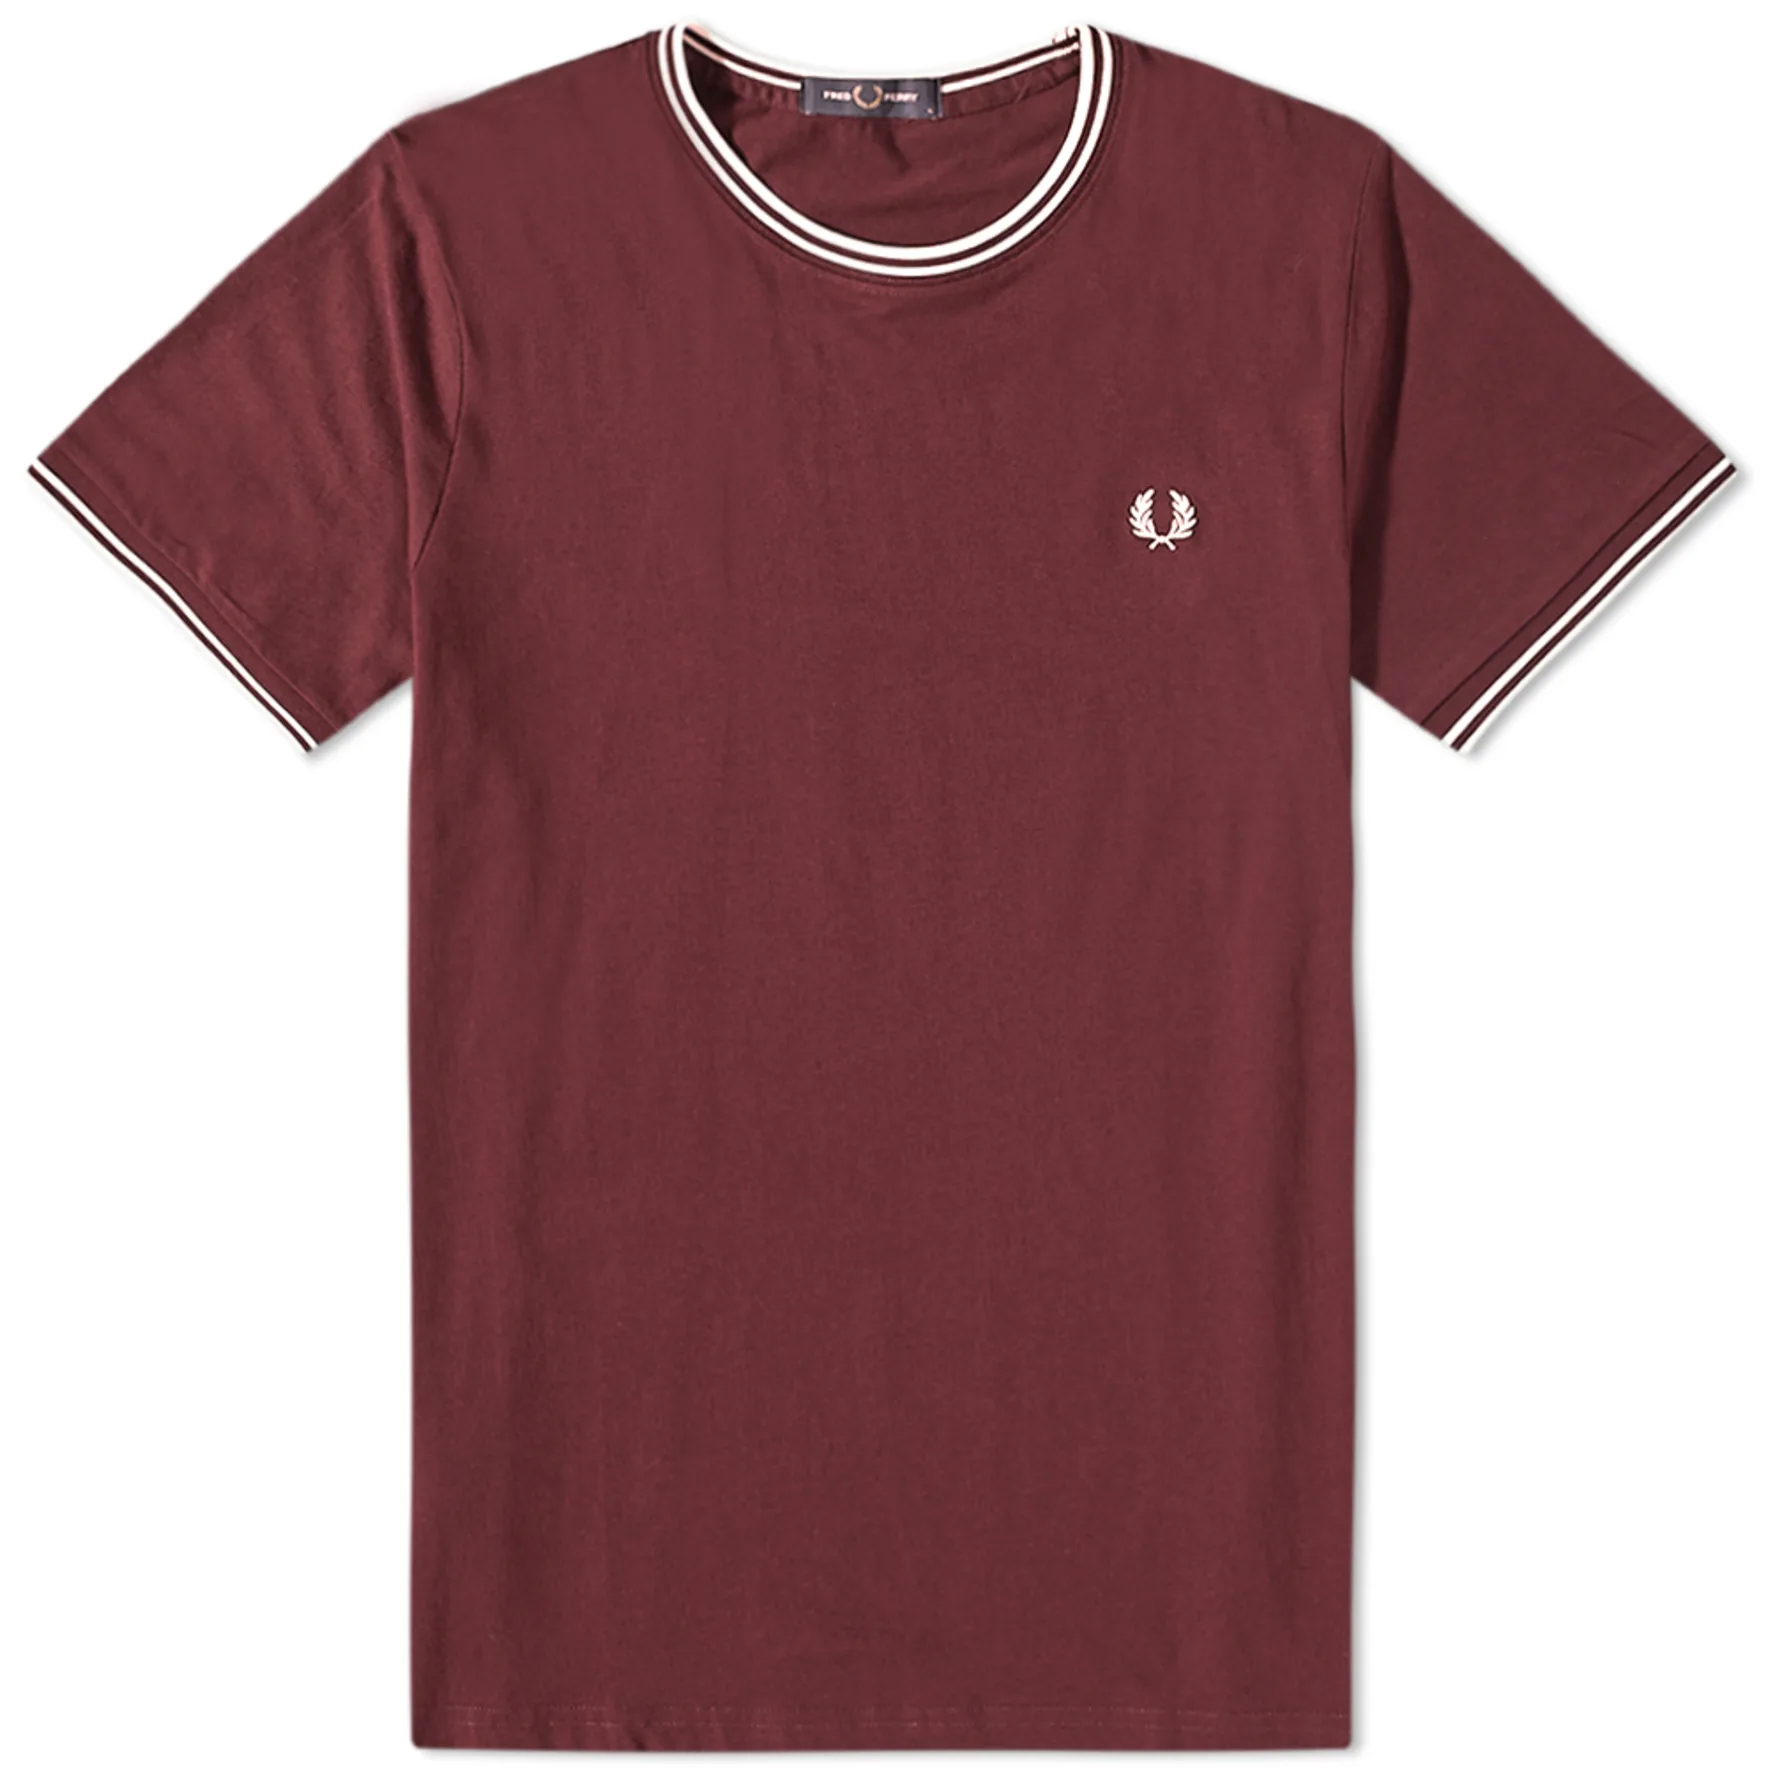 Футболка Fred Perry Authentic Twin Tipped, бордовый поло fred perry twin tipped цвет snow oat